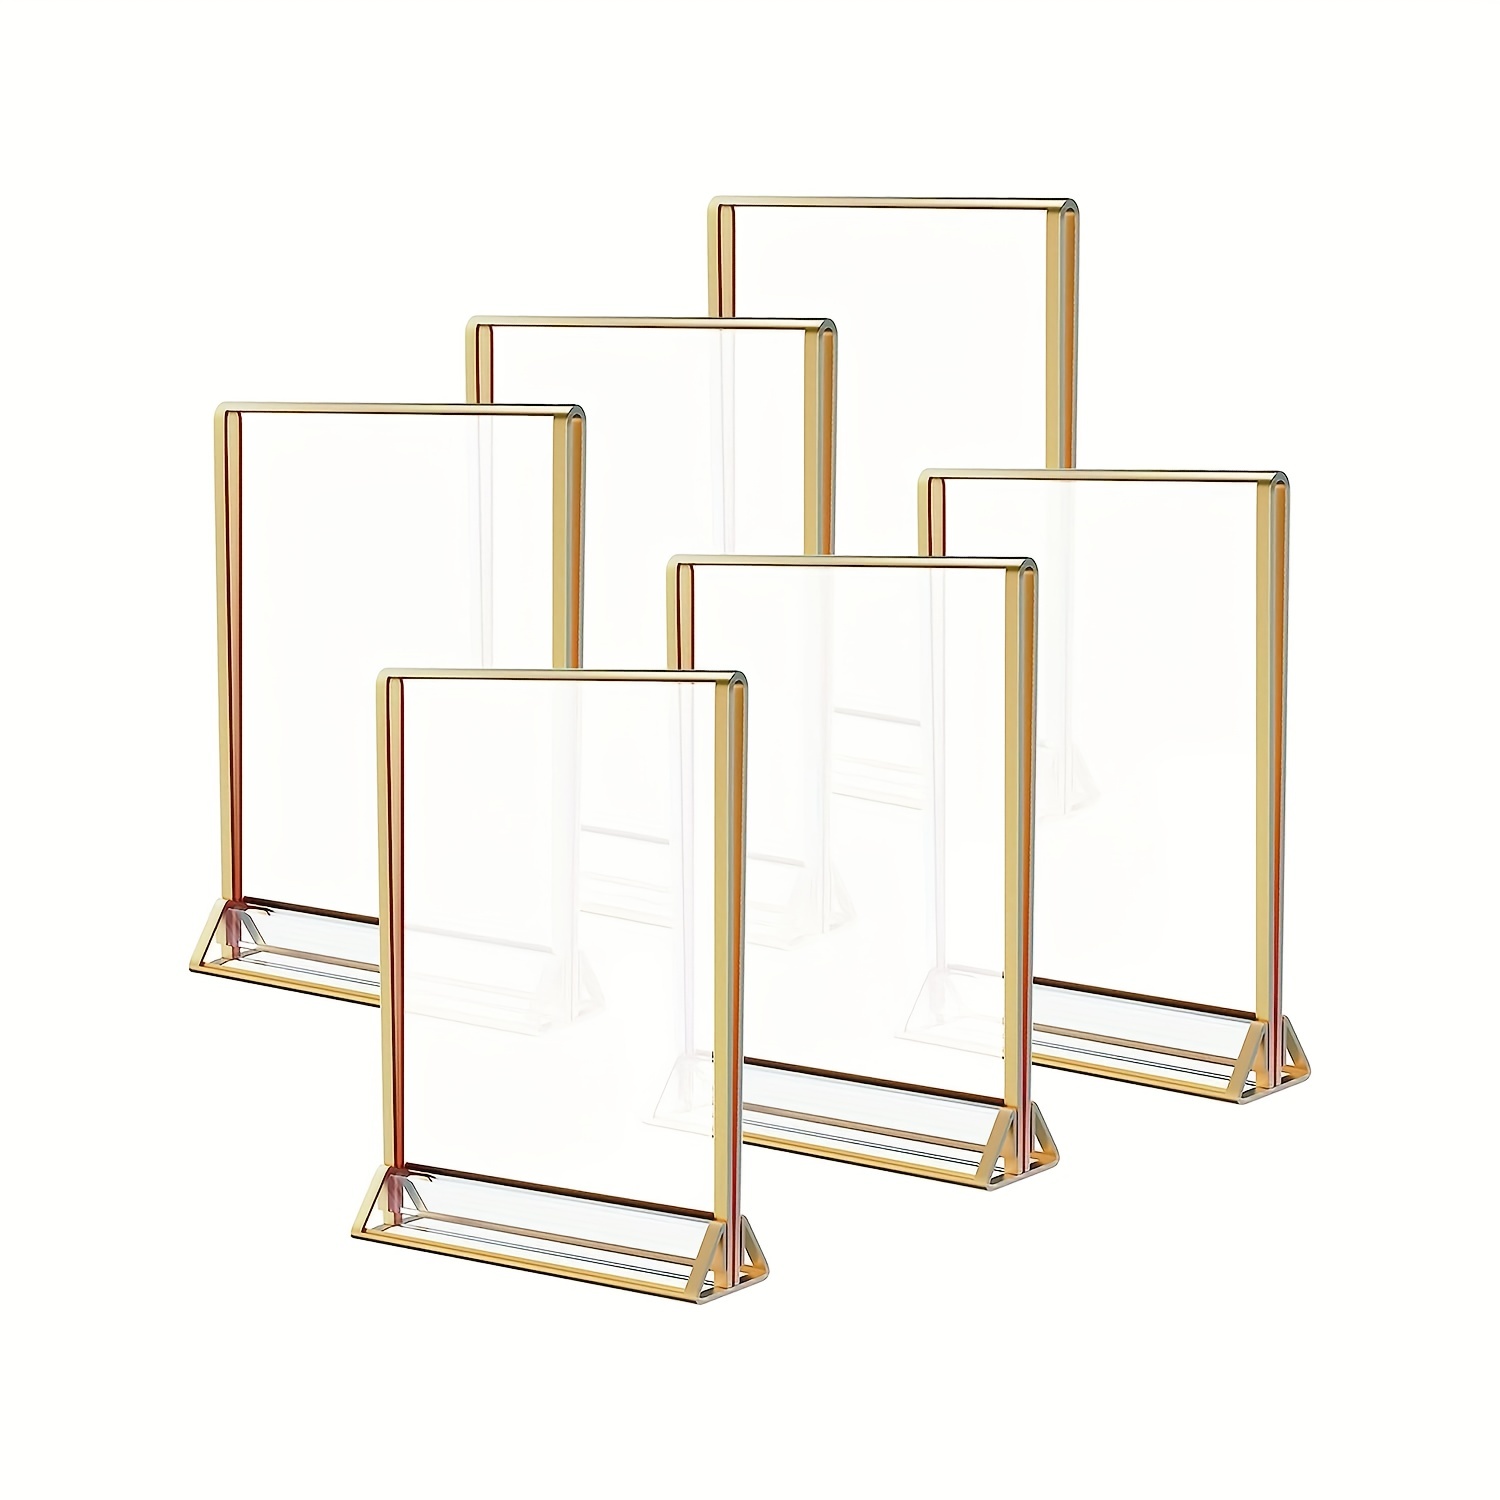 Gold Picture Frames Double Sided - 6 Pack - 4x6 Acrylic Gold Table